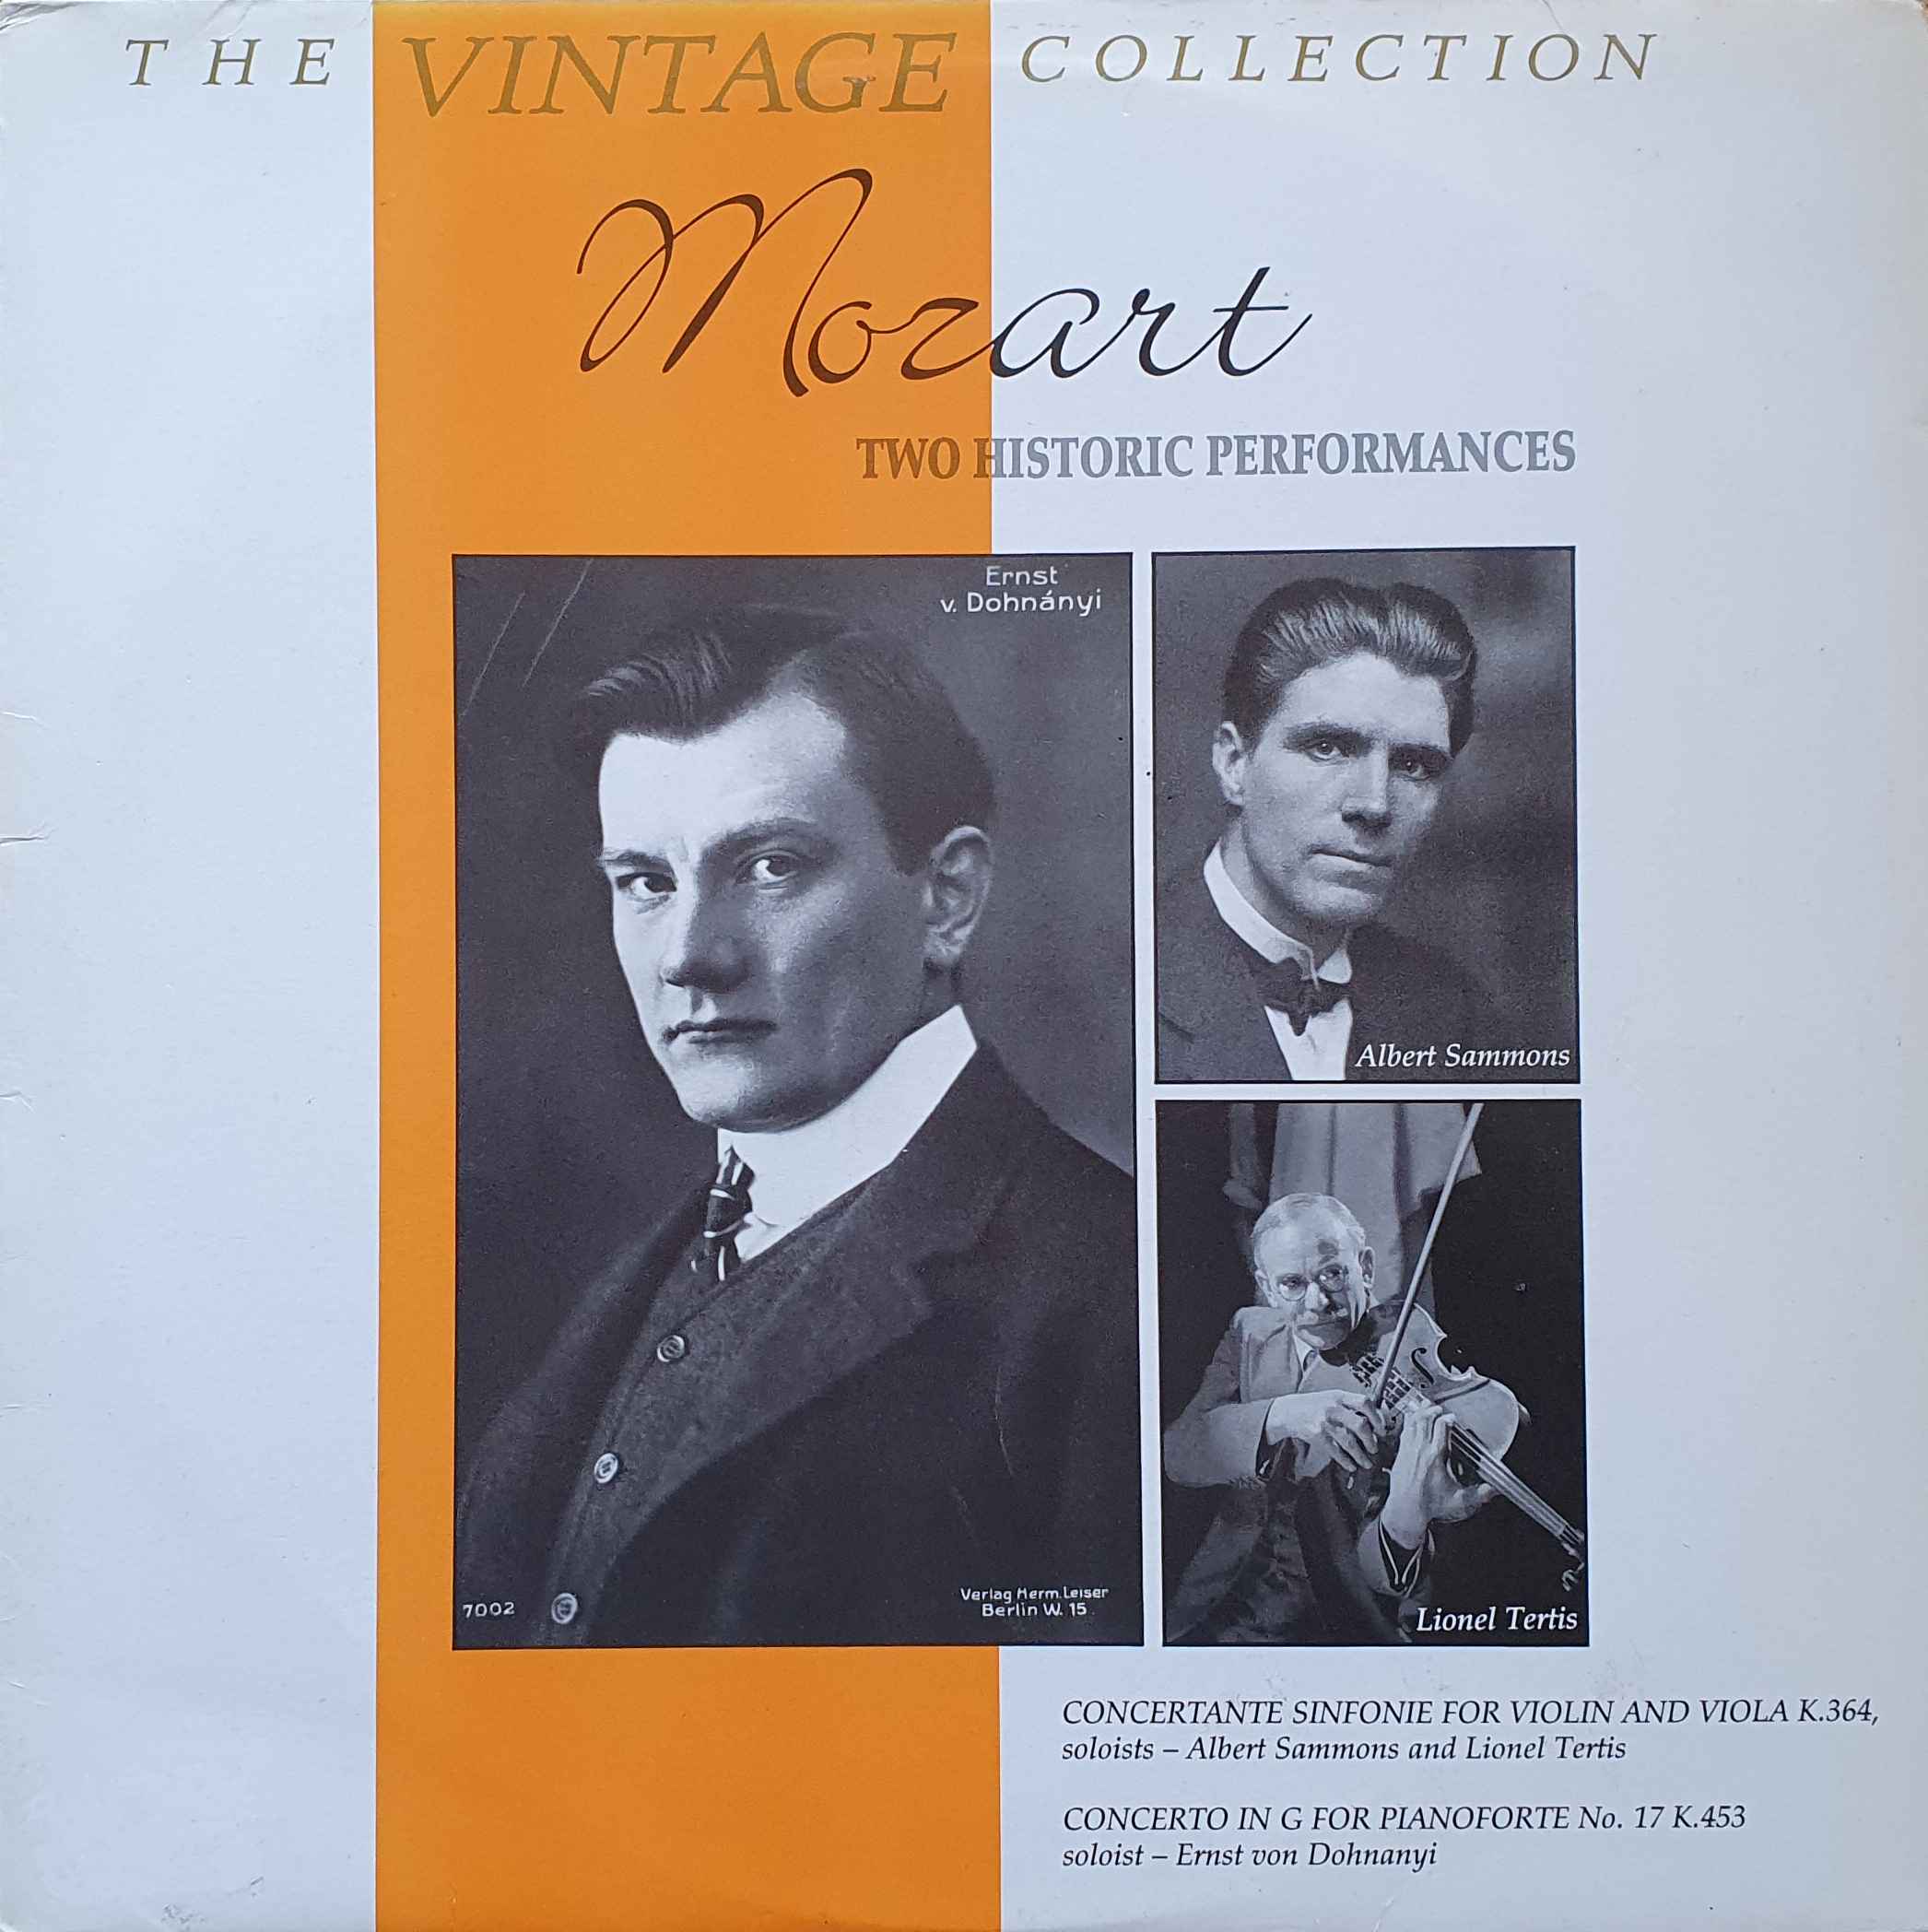 Picture of REH 757 The vintage collection - Mozart two historic performances by artist Mozart / Sammons / Tetris / Dohnanyi from the BBC albums - Records and Tapes library